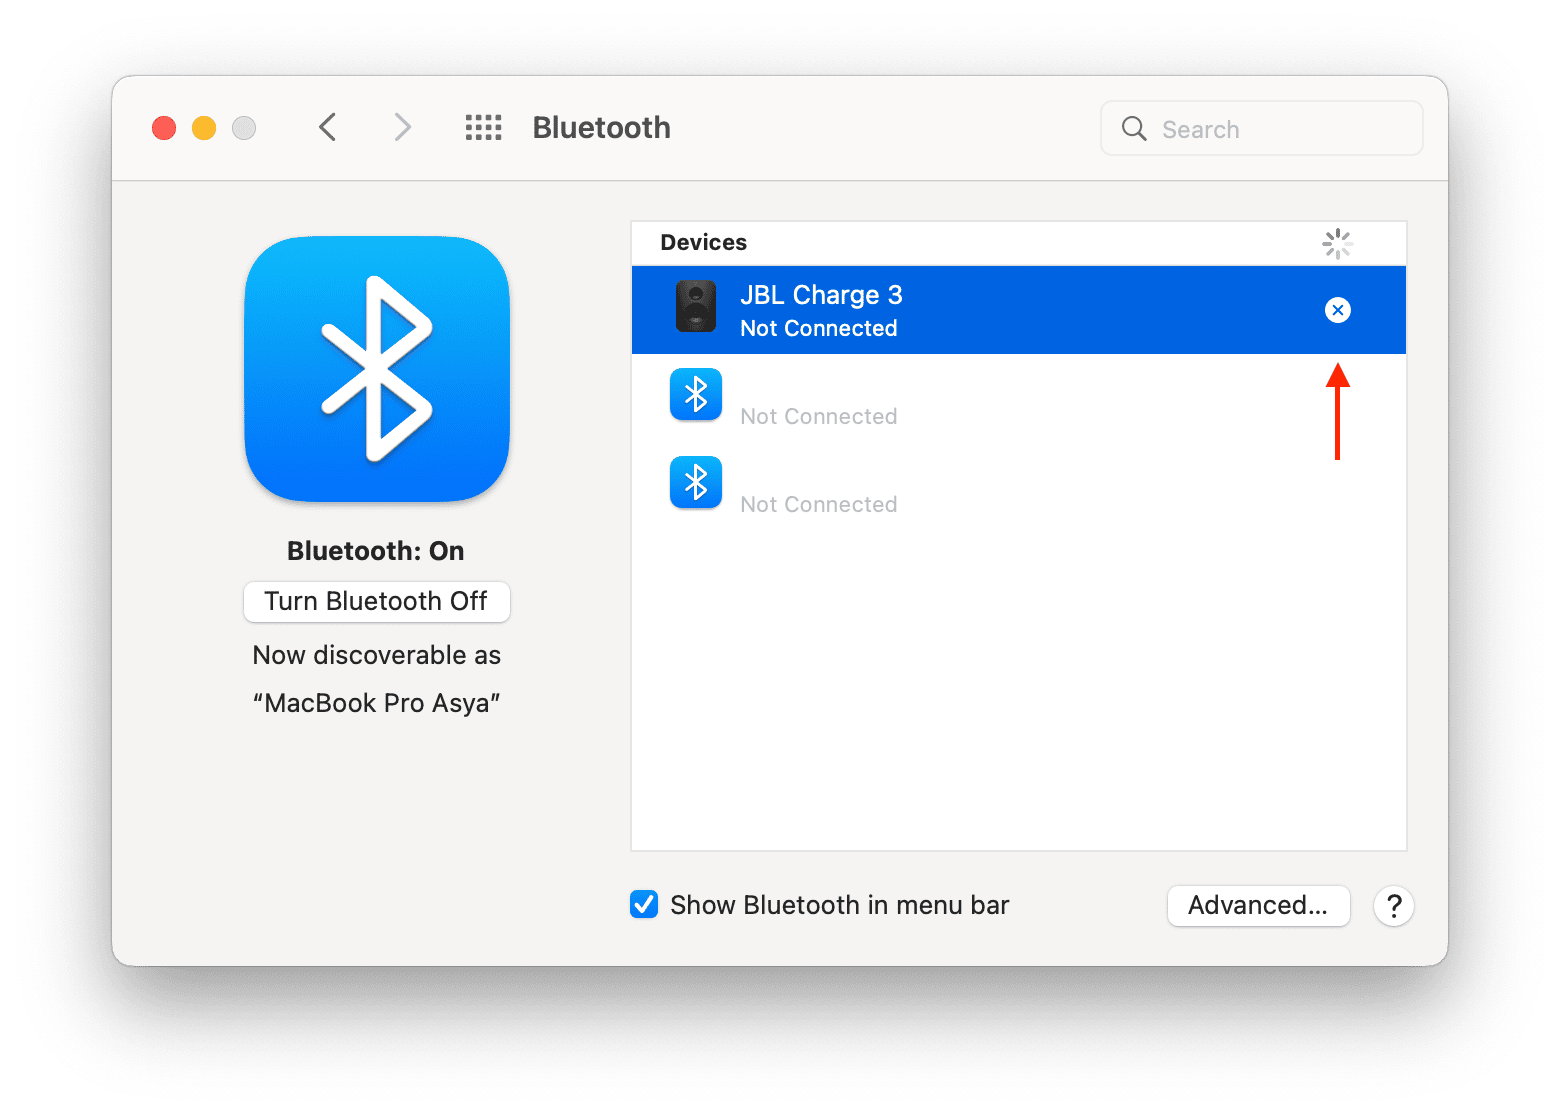 bluetooth preferences window showing how to disconnect device